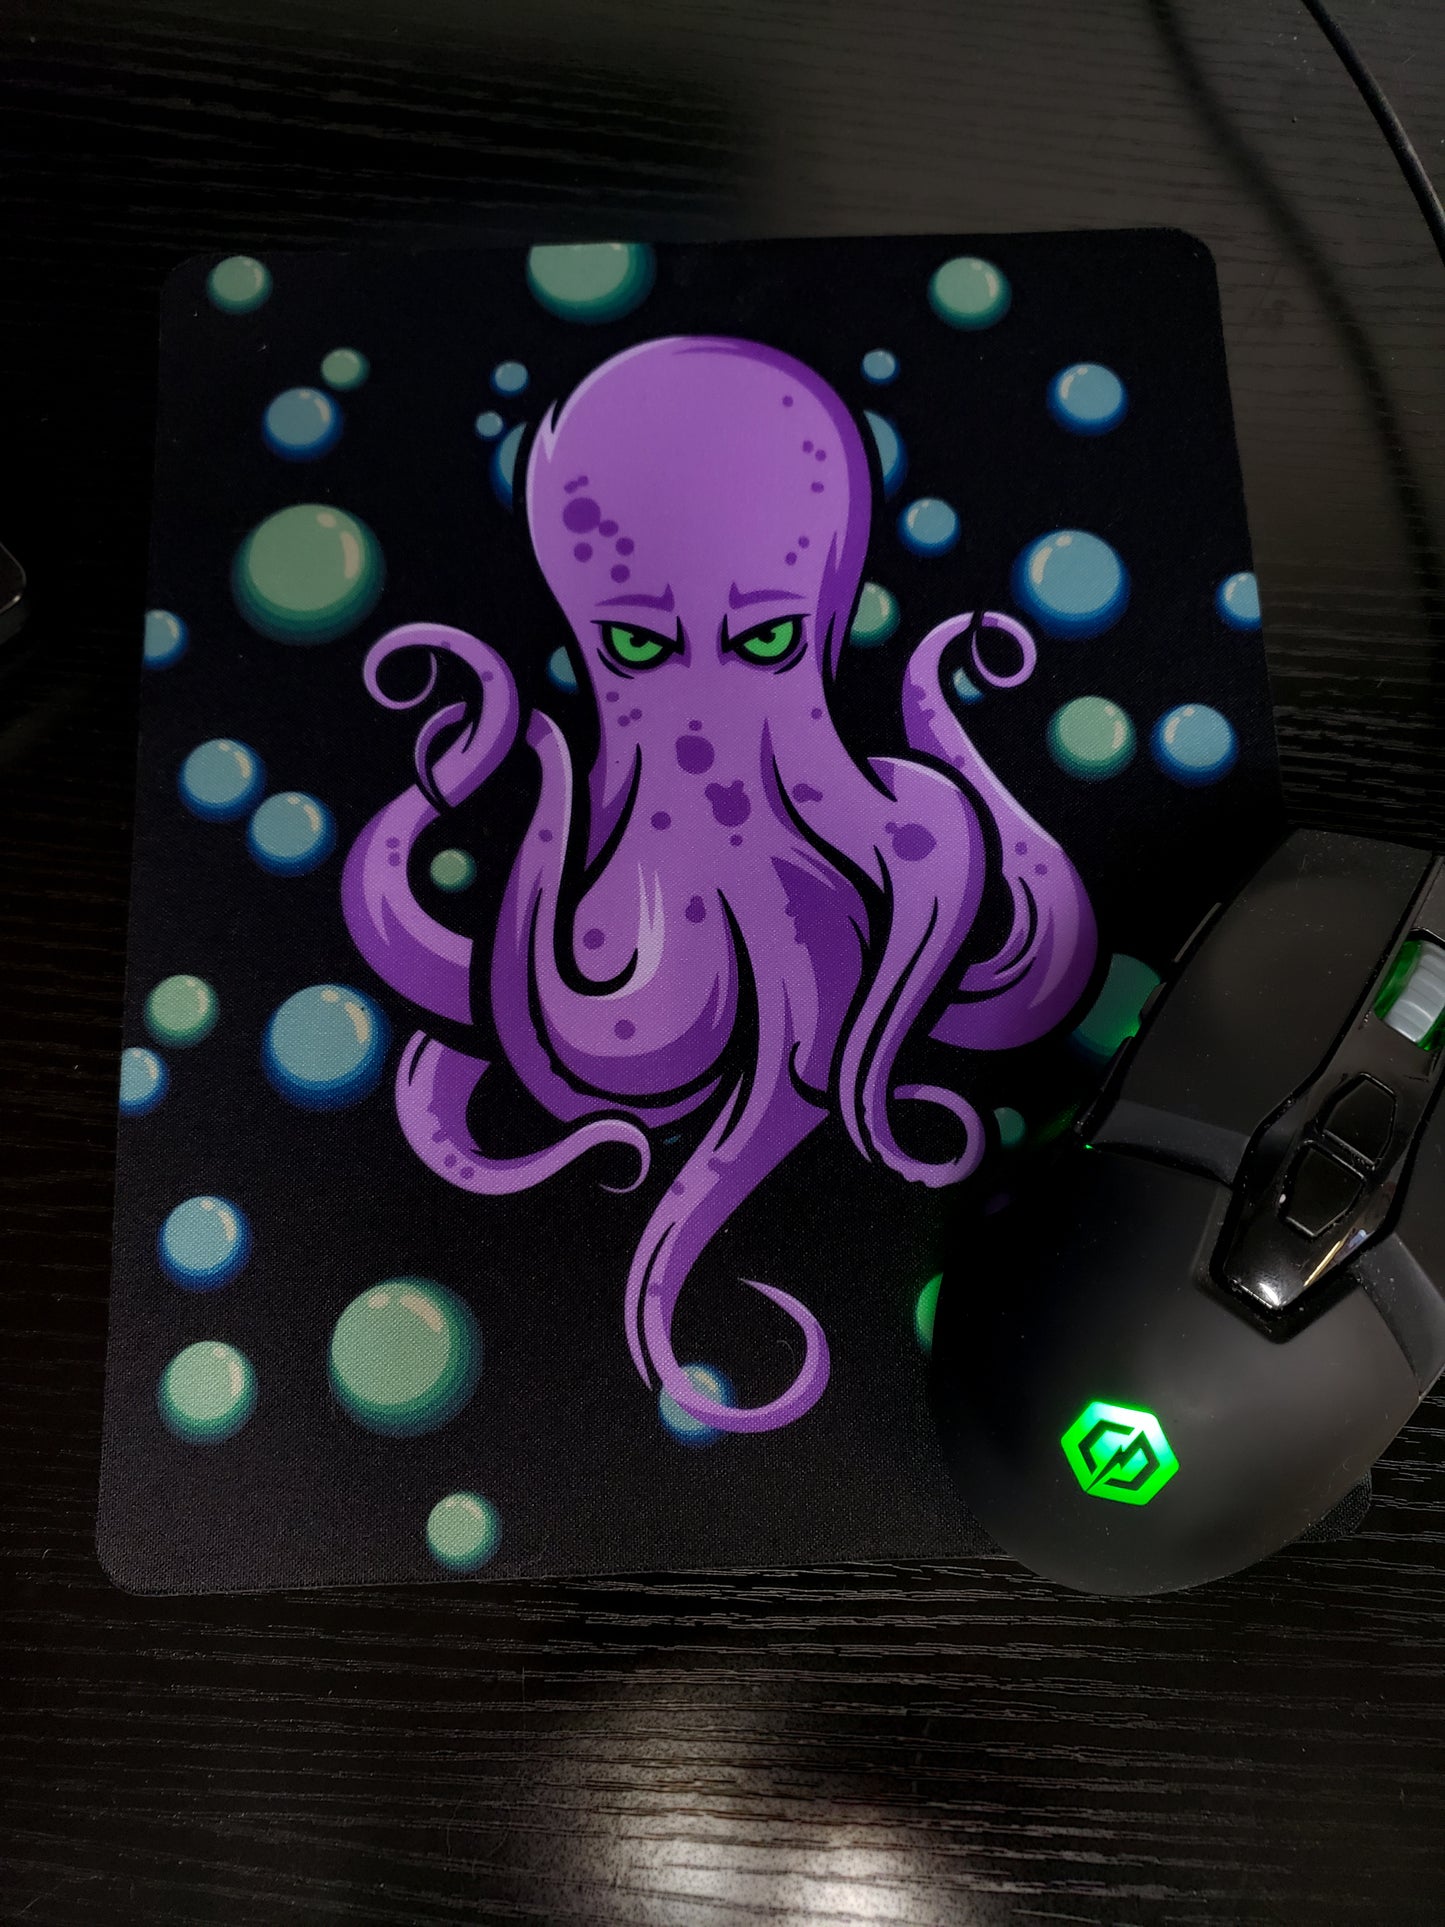 Angry Octopus Mousepad